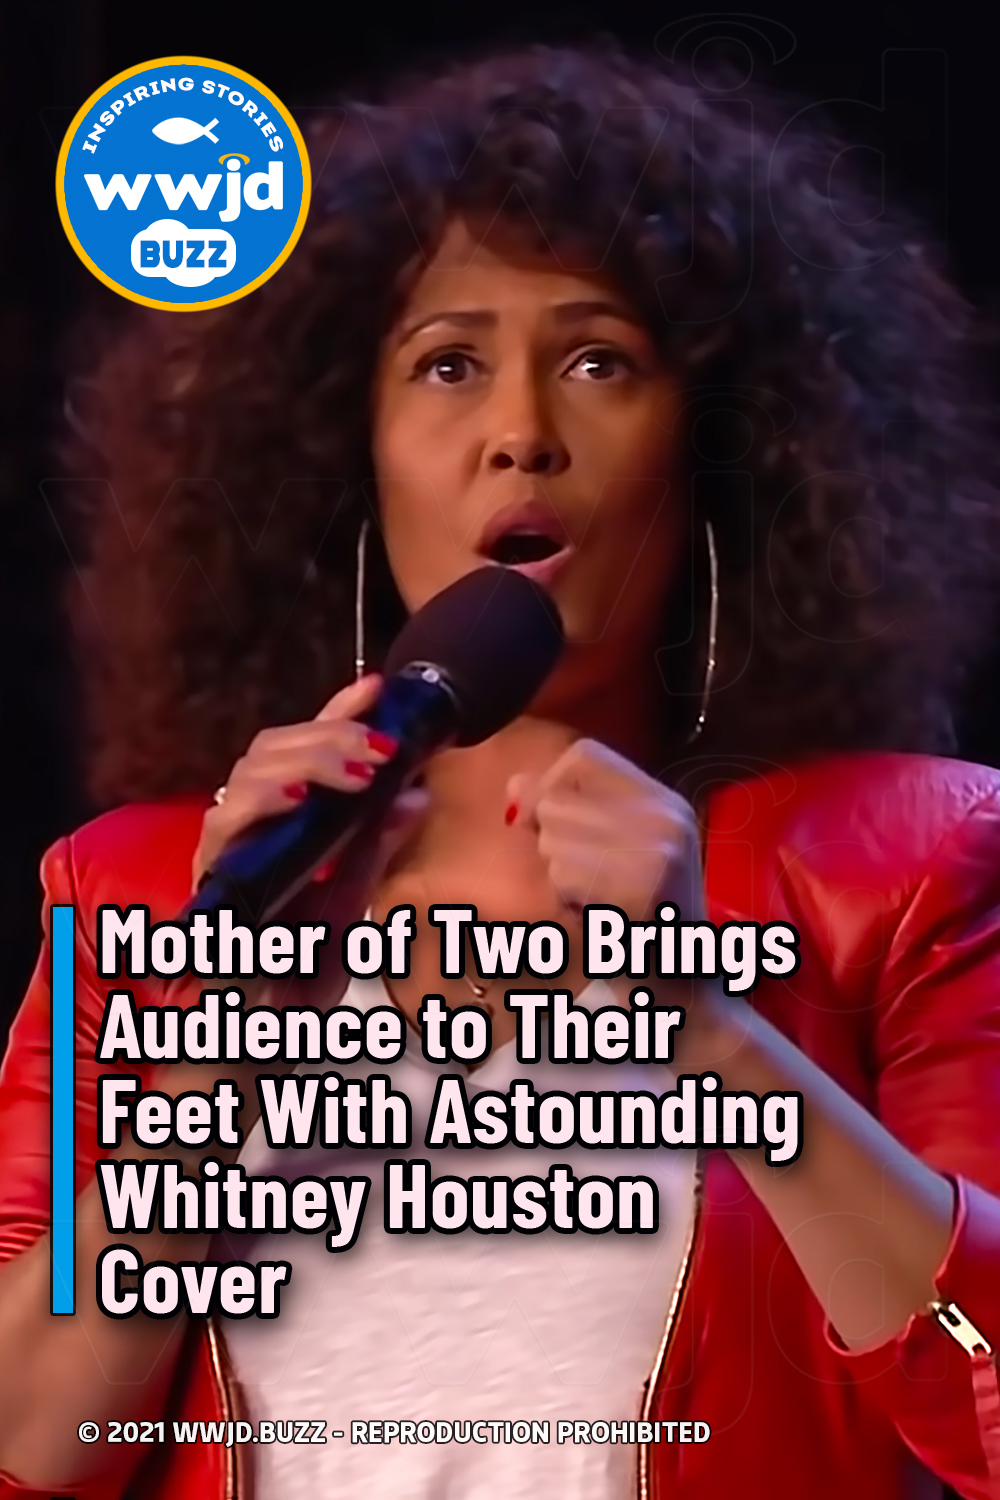 Mother of Two Brings Audience to Their Feet With Astounding Whitney Houston Cover